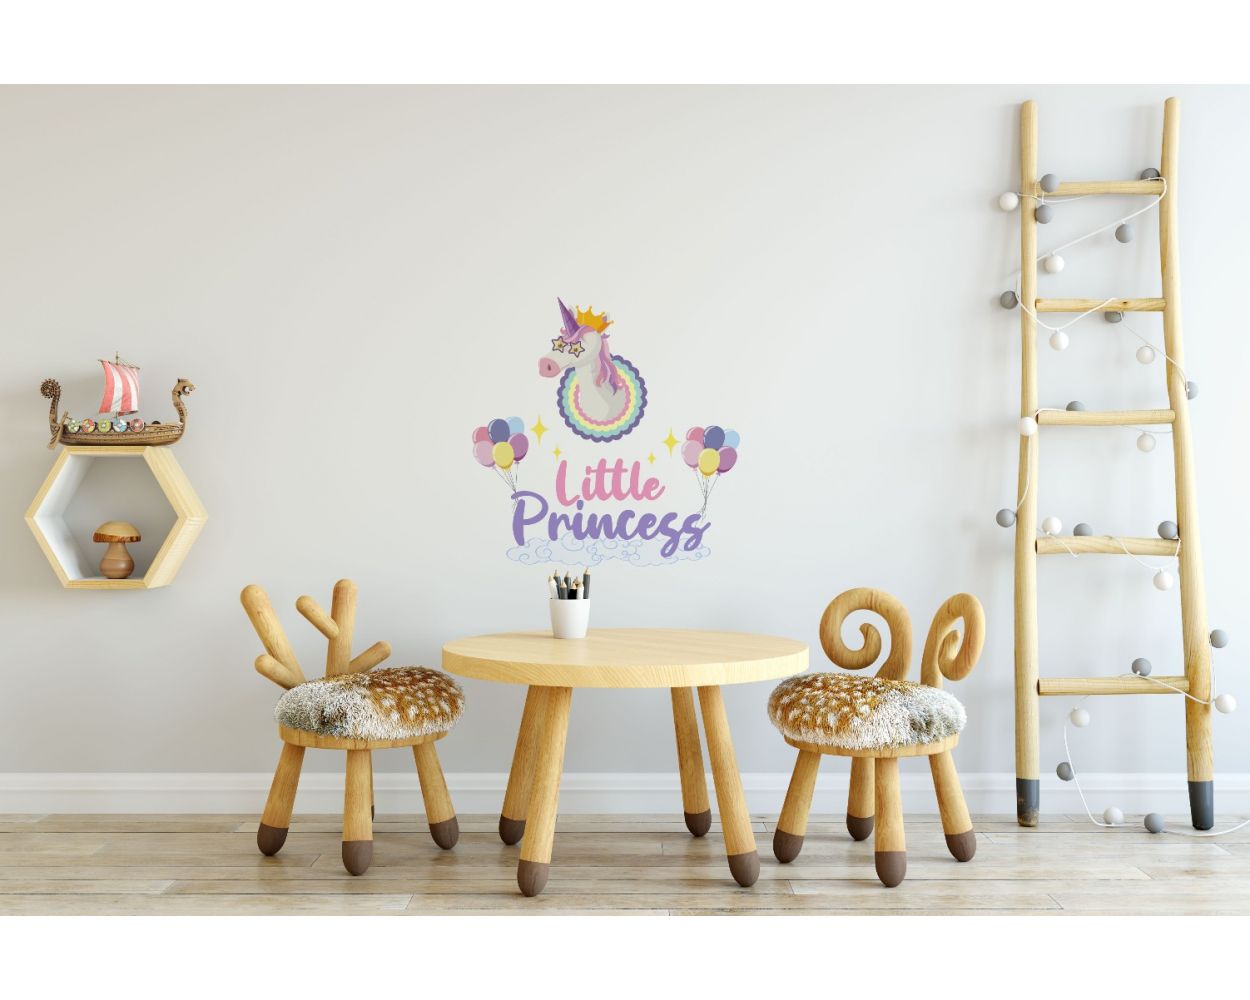 Beautiful Unicorn Vinyl Wall Stickers For Your Little Princess Room Wall Decor